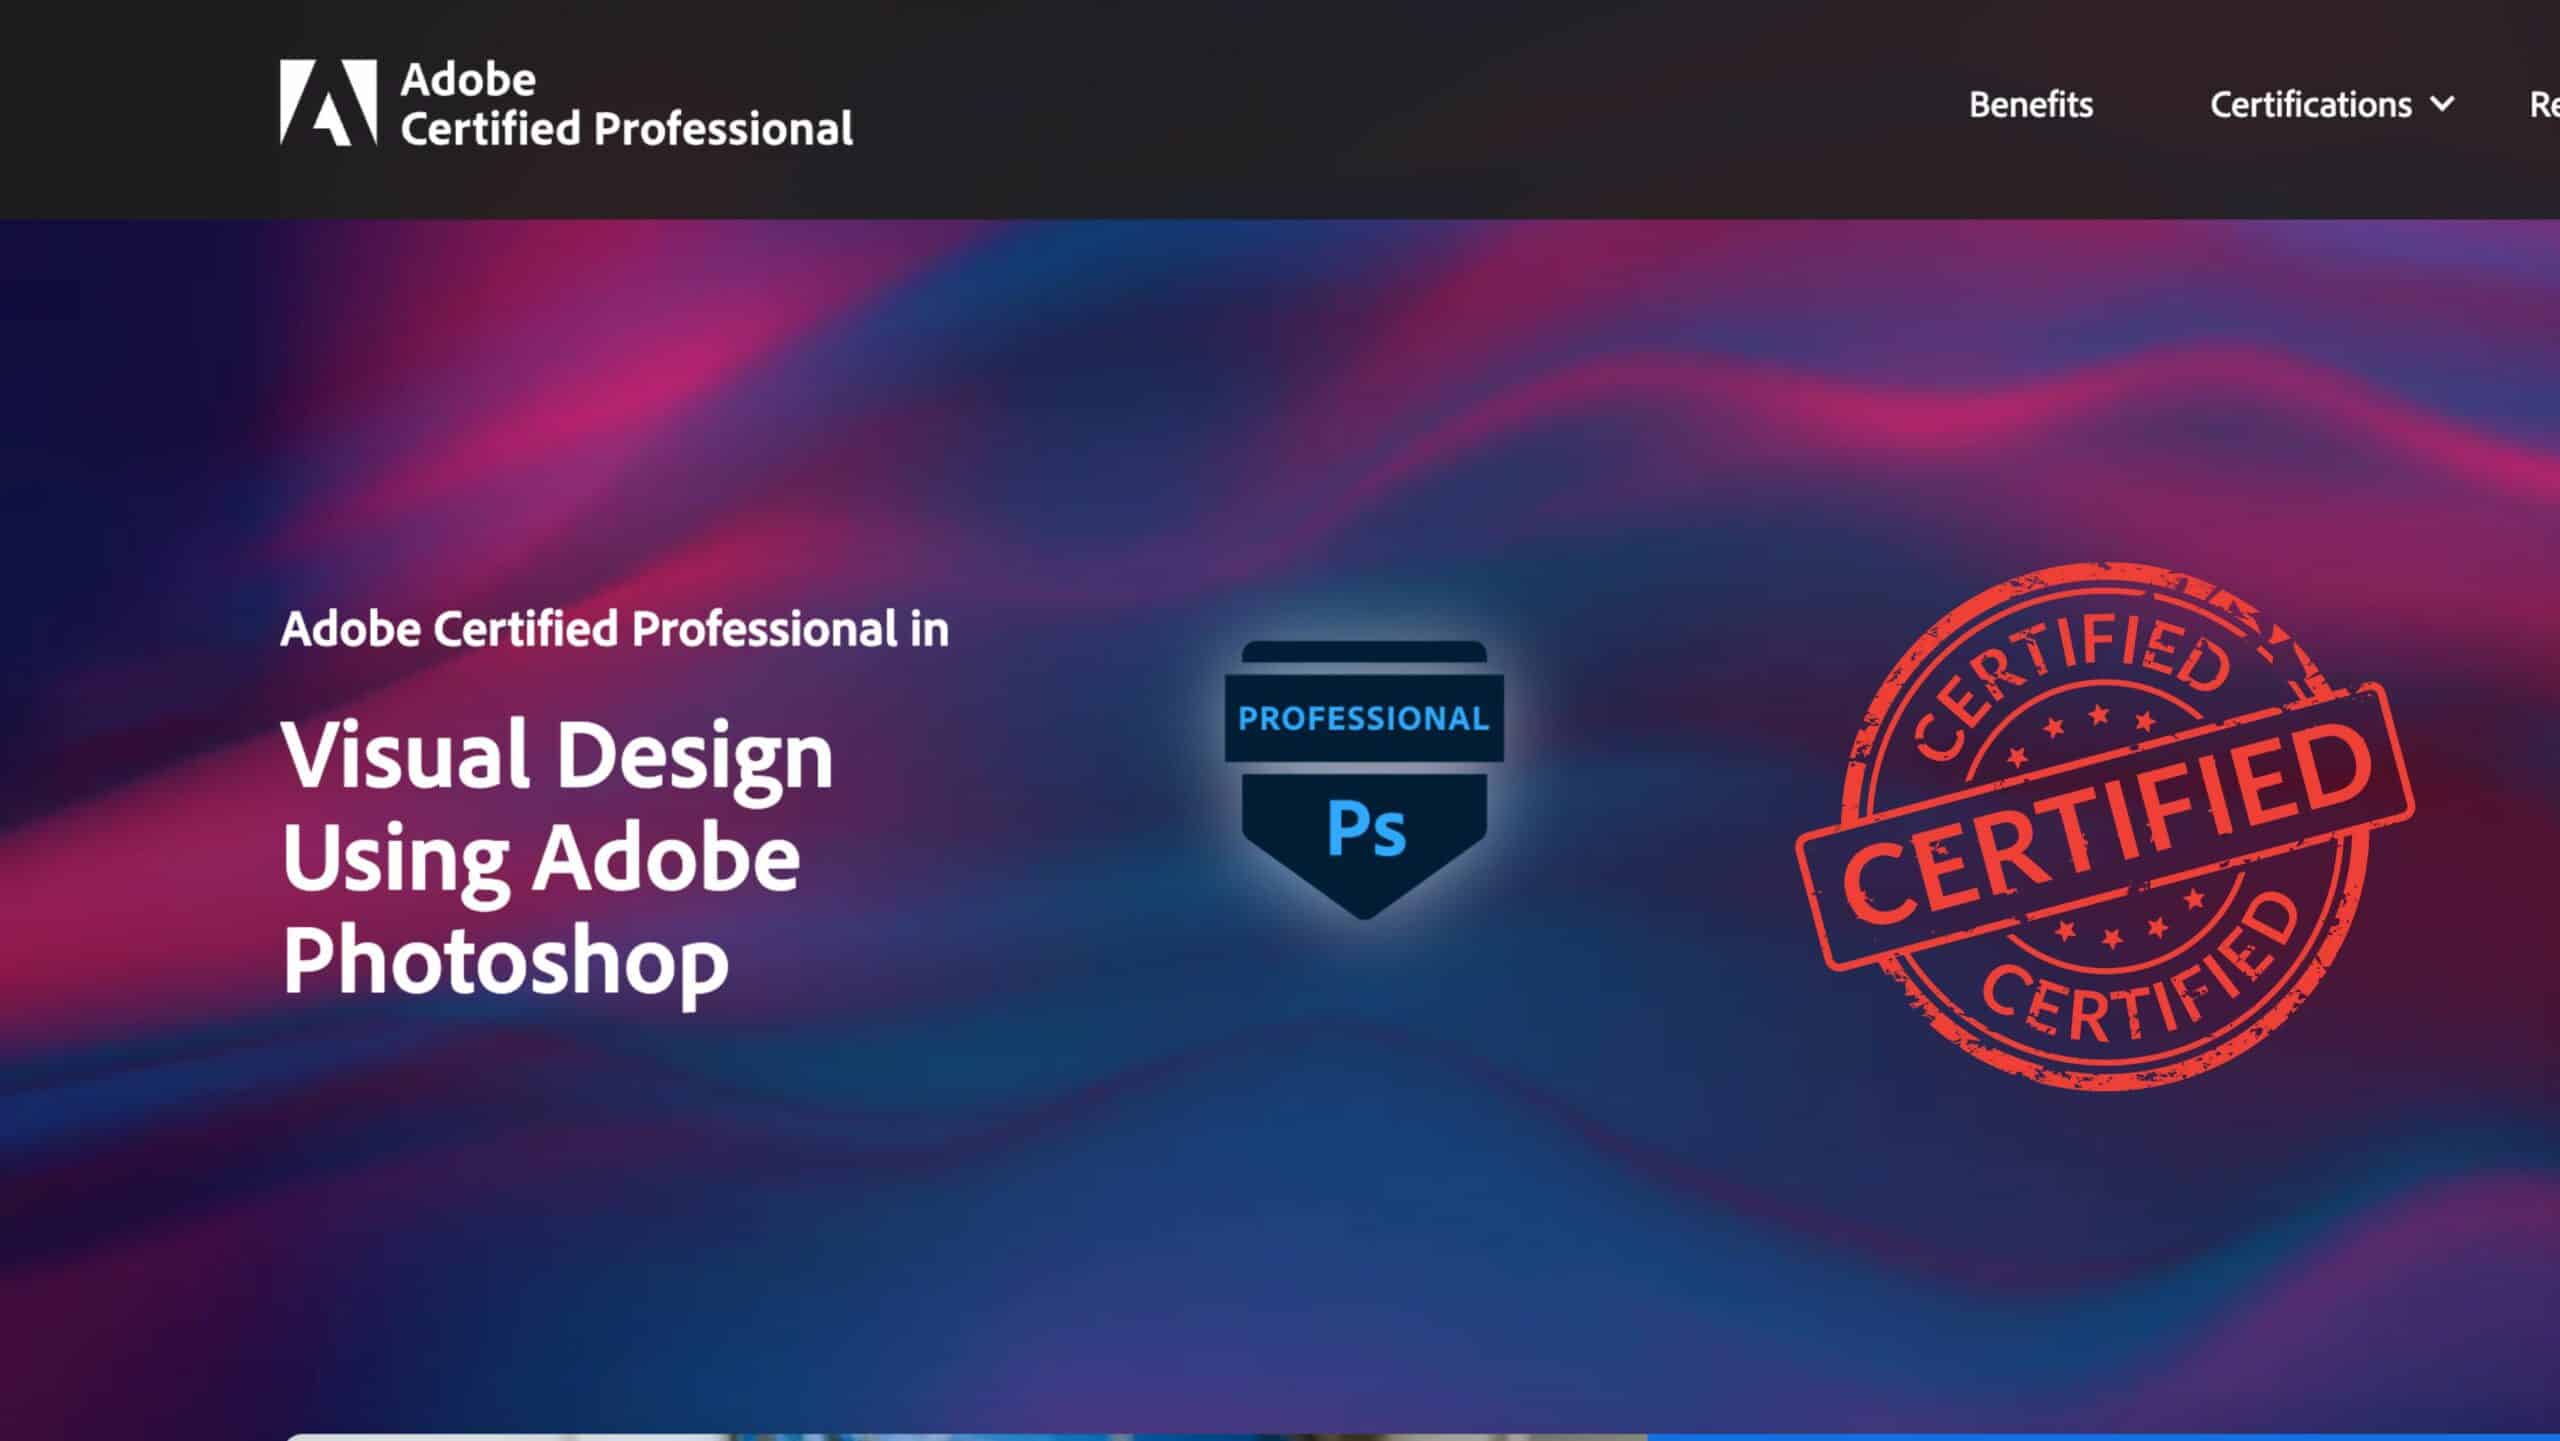 How to Get Photoshop Certified?